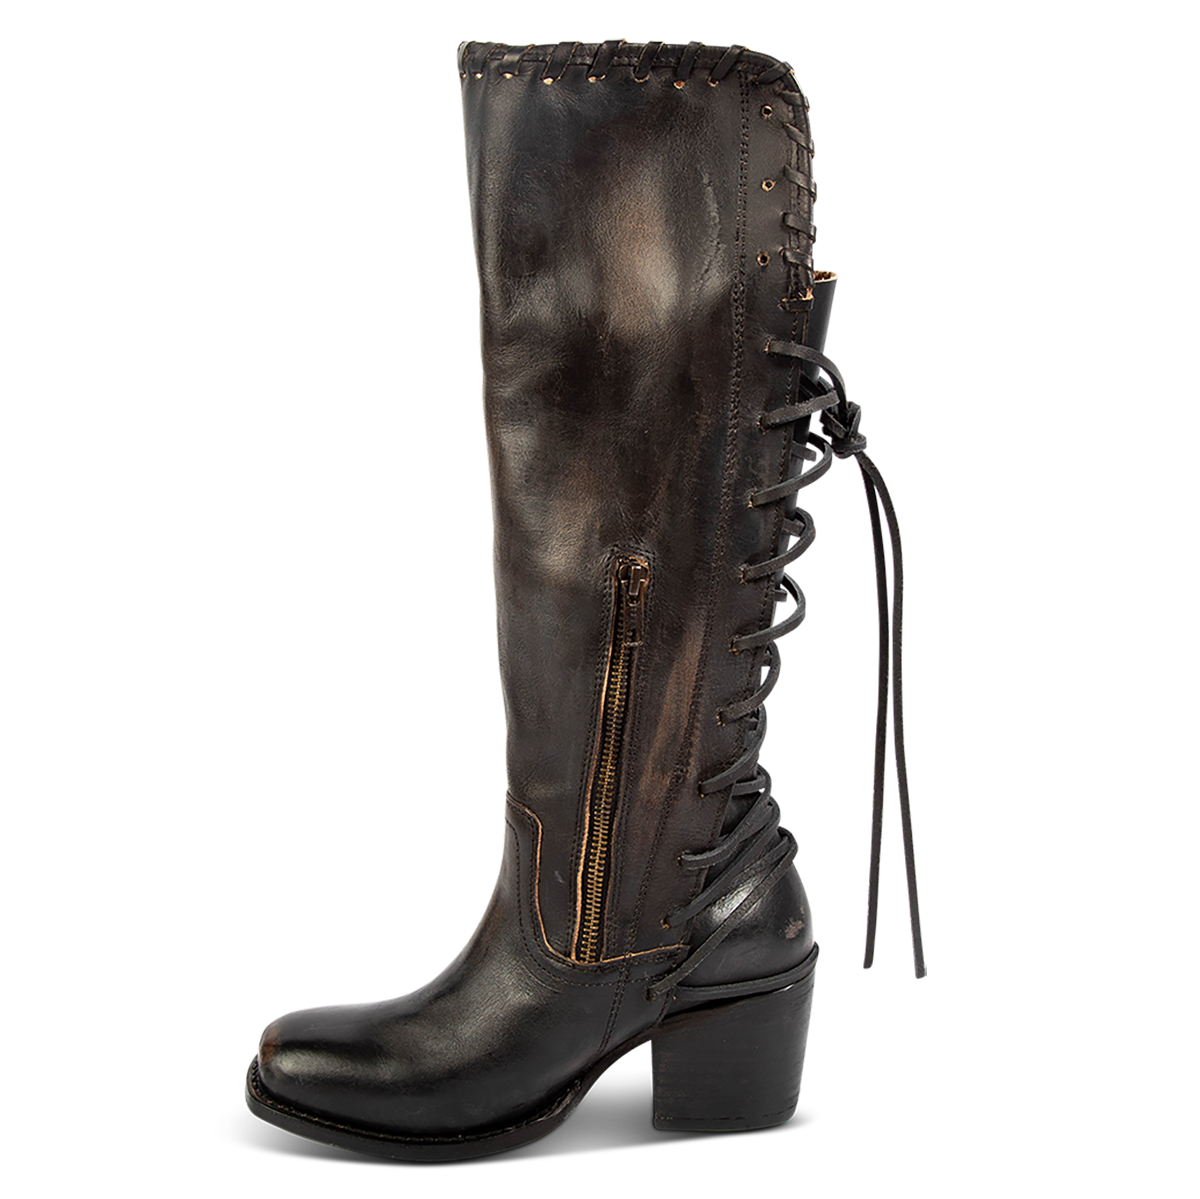 Inside view showing an inside working brass zipper on FREEBIRD women's Dillon black leather boot with 100% full grain leather, whip stitch edge detailing and adjustable back leather lacing